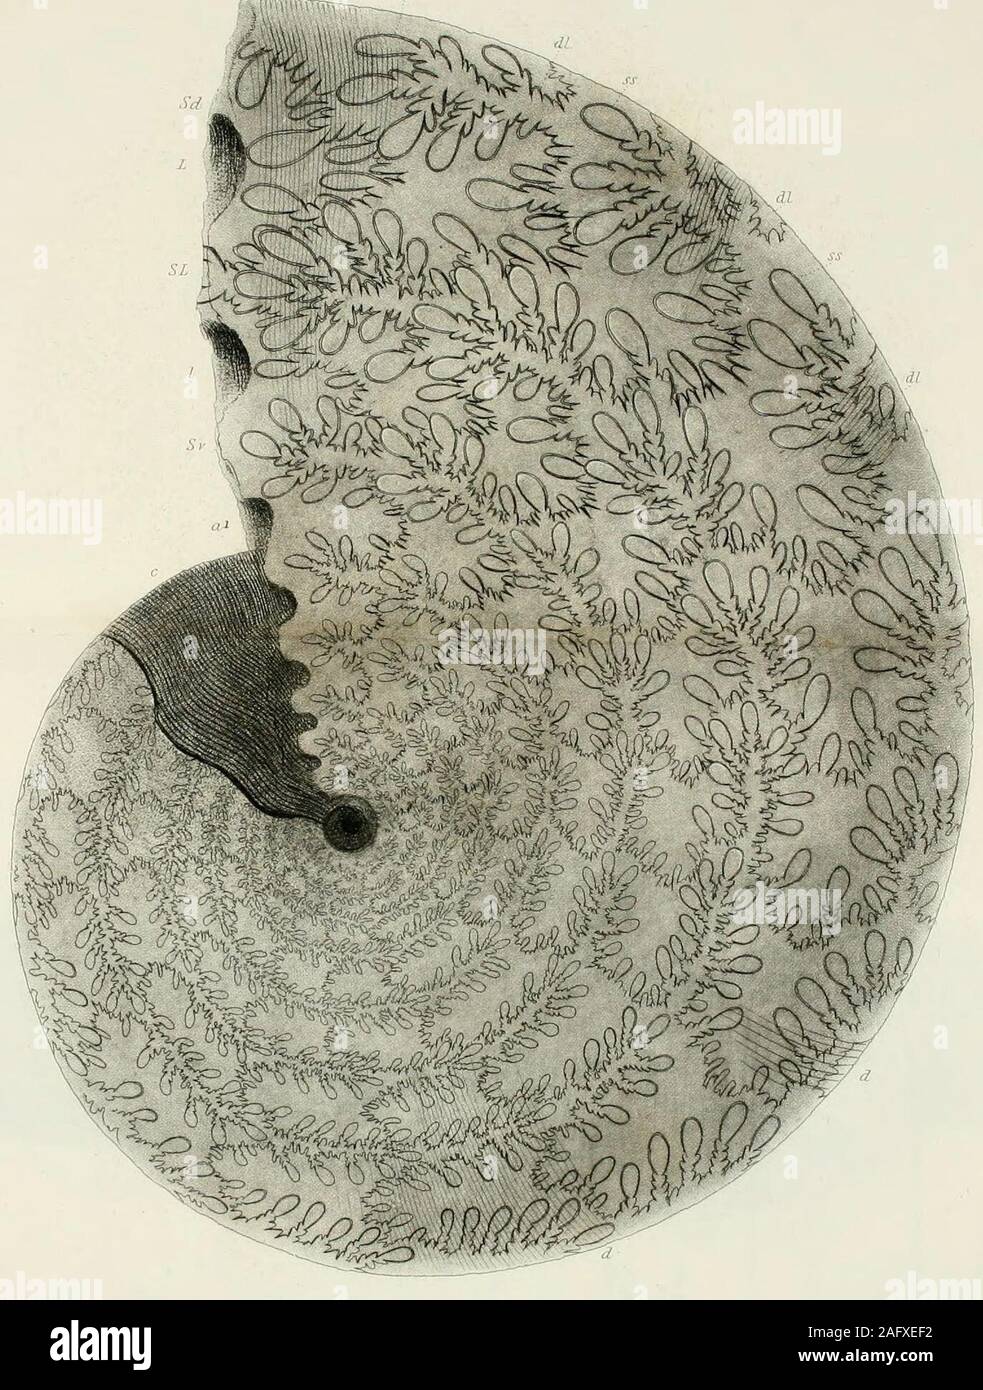 . Geology and mineralogy considered with reference to natural theology. 3vnbu£- by C HUlhrwurbCiUA/. A/aracms fomas of Ammonites. AMMONITES HETEROPHY] 1.1 S Stock Photo